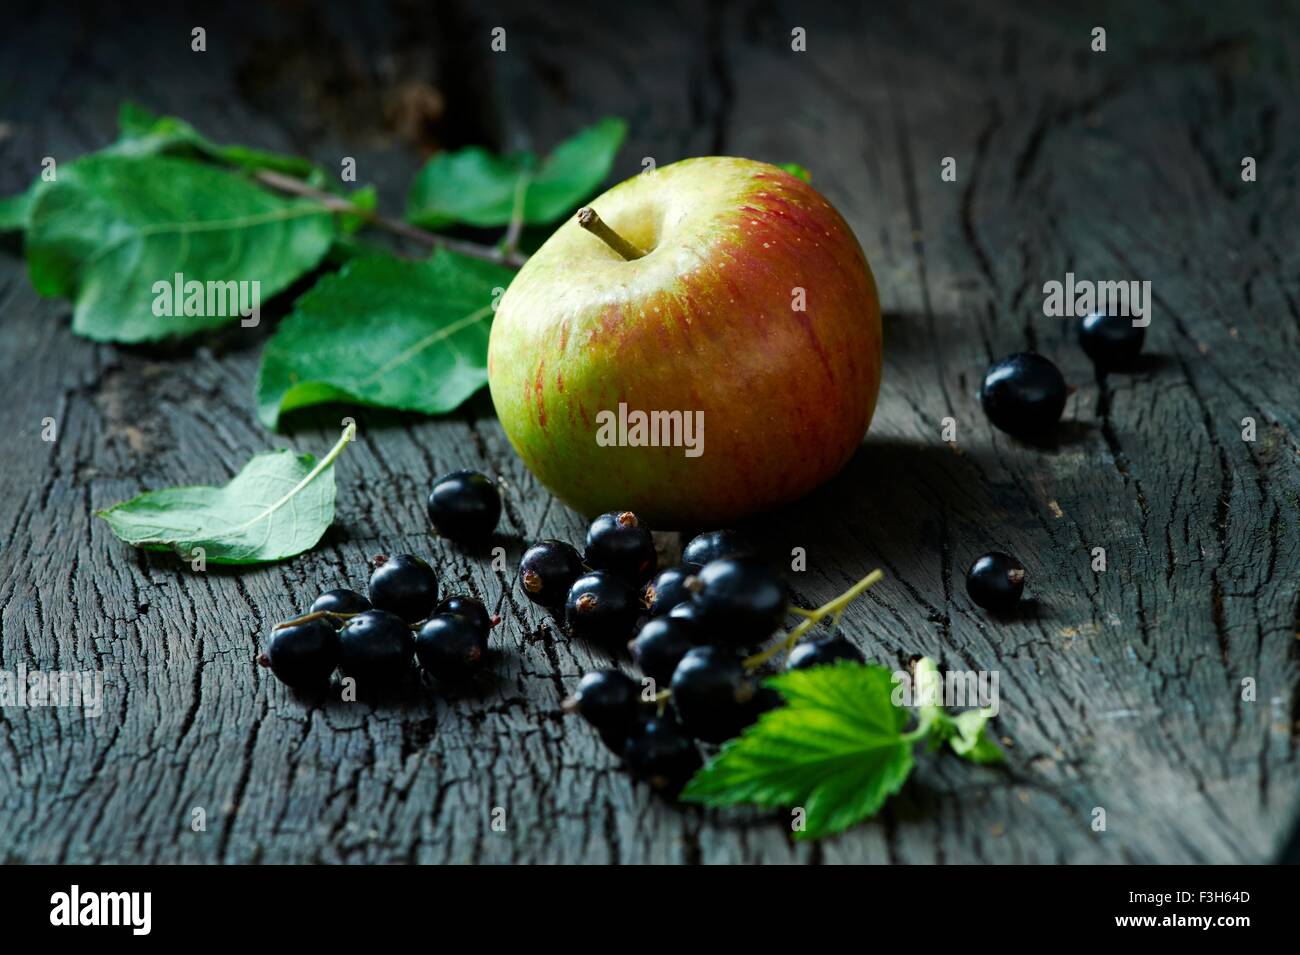 Cox's apples and blackcurrants on old wooden surface Stock Photo